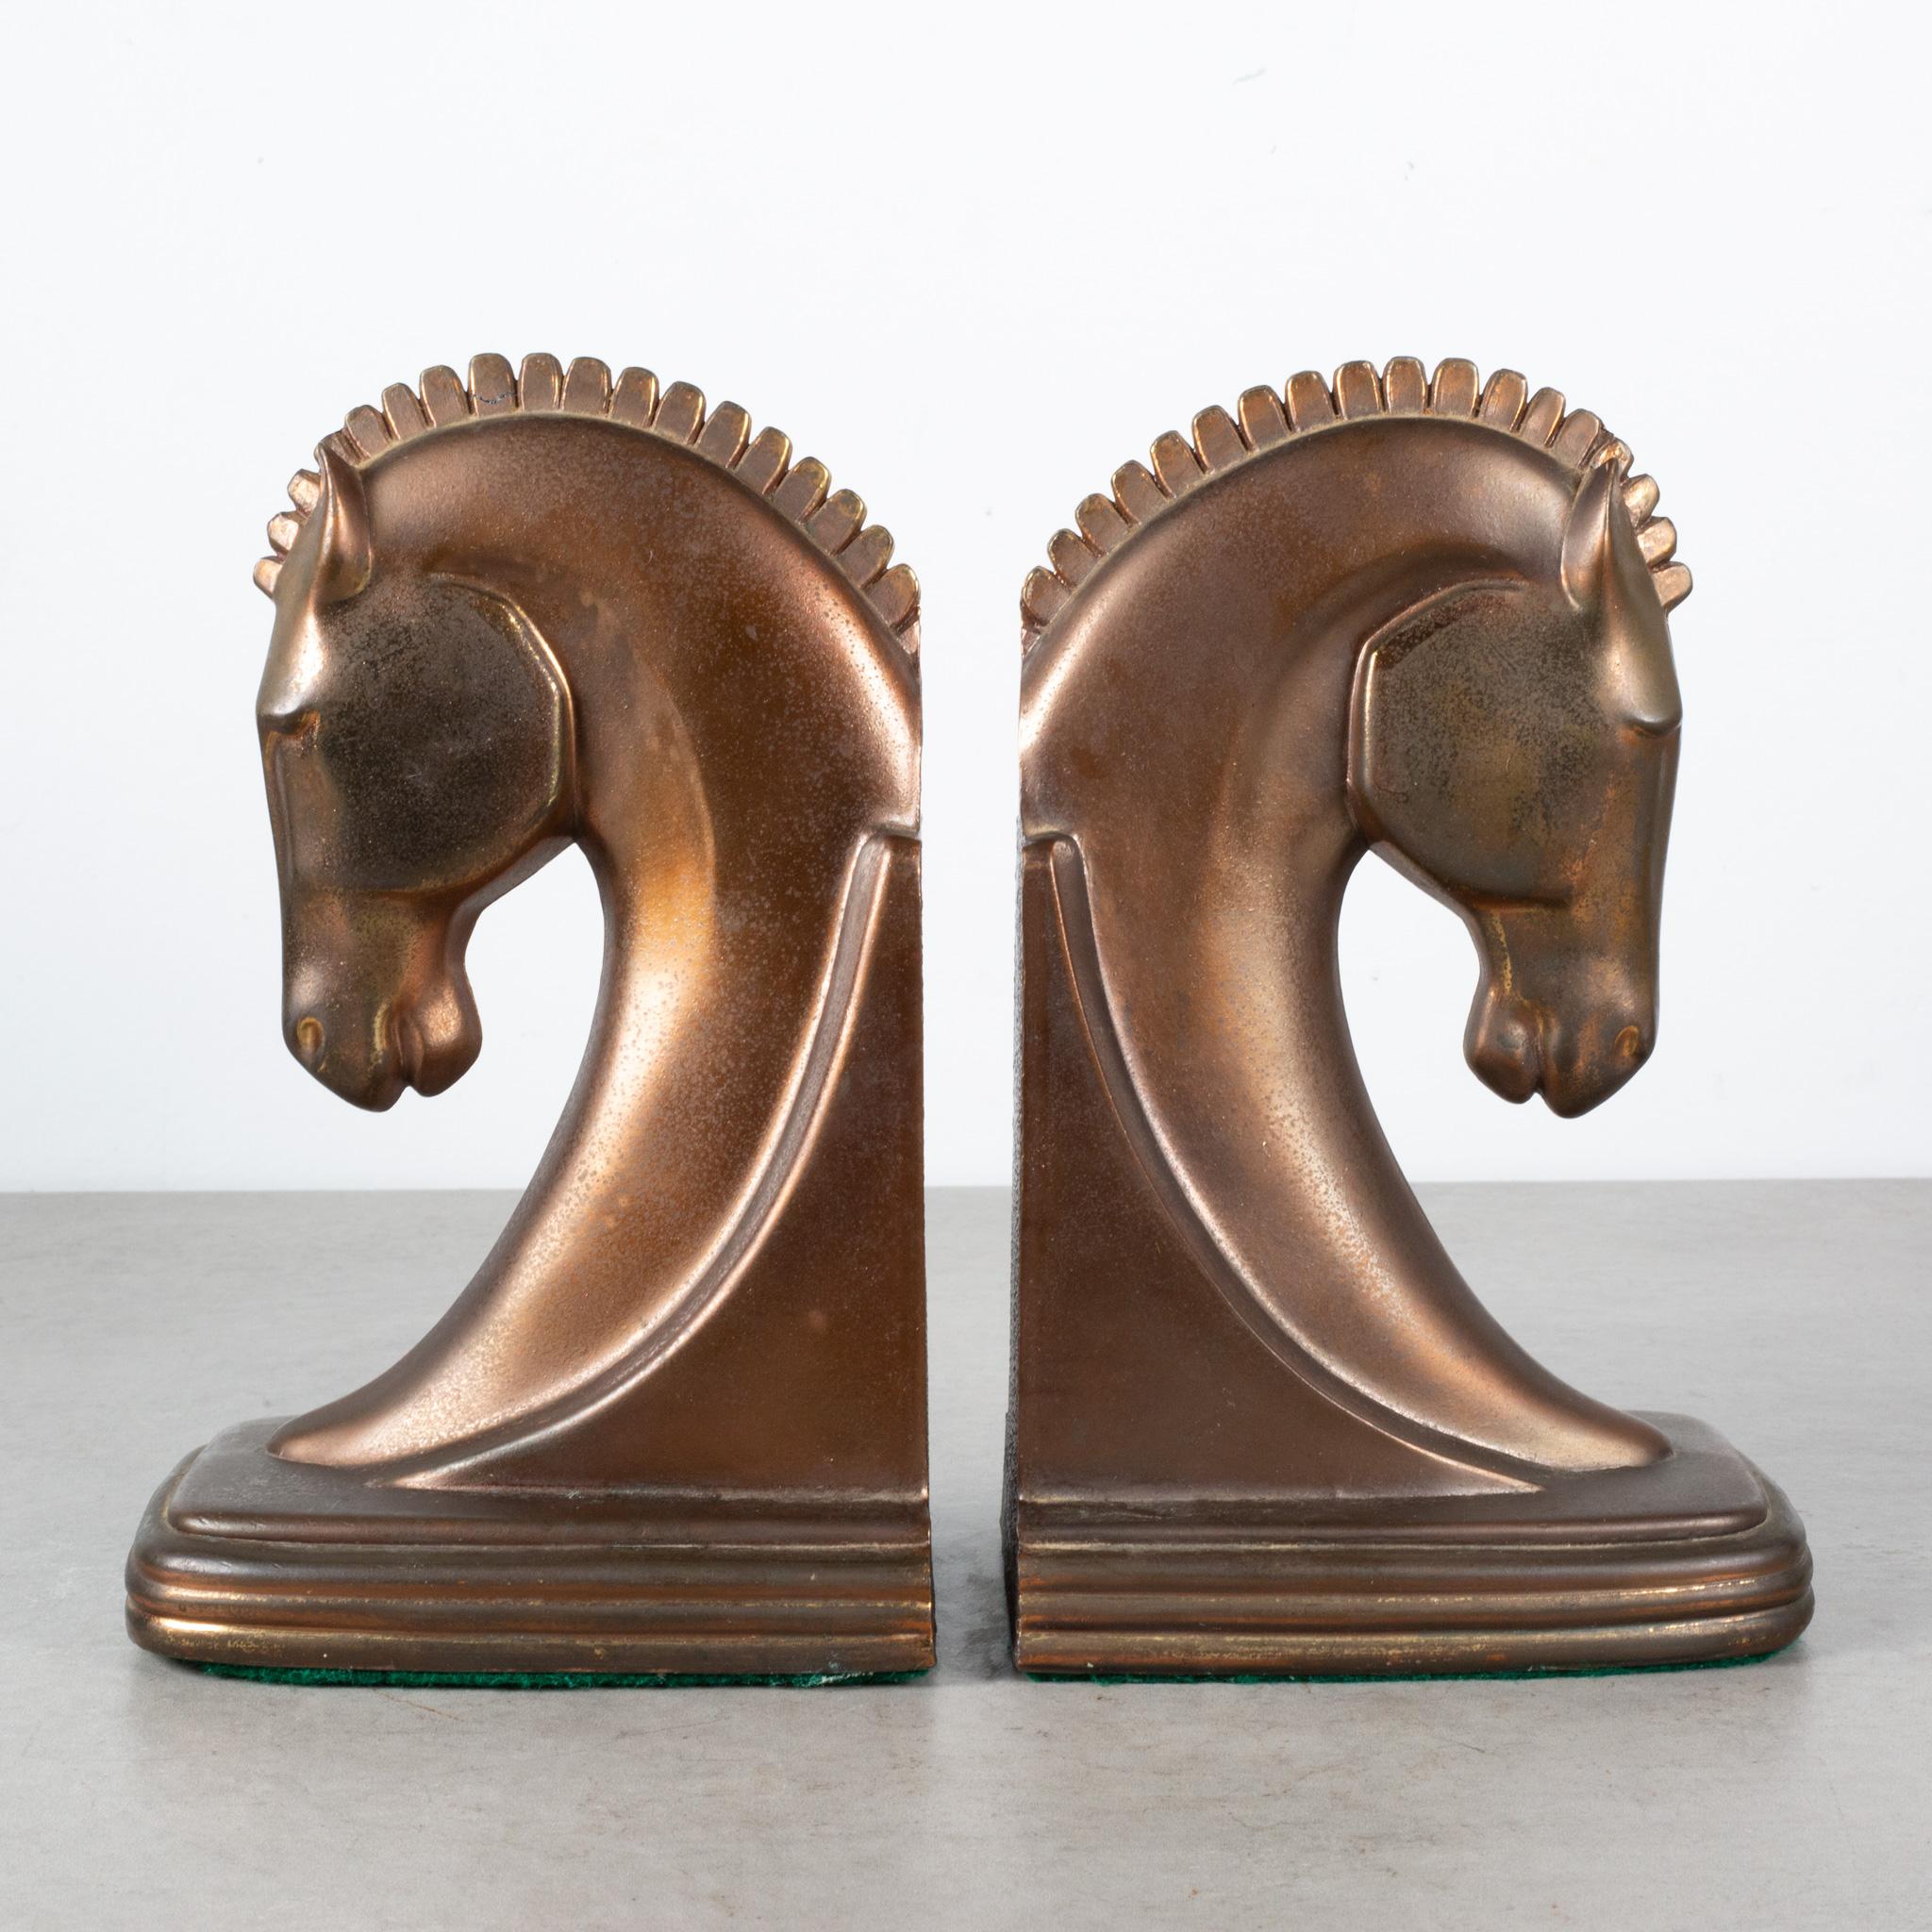 ABOUT

An original pair of Art Deco Trojan horse bookends manufactured by Dodge Trophy Inc. Los Angeles California USA. Both pieces have retained their original bronze finish and are in good condition with appropriate patina for their age.